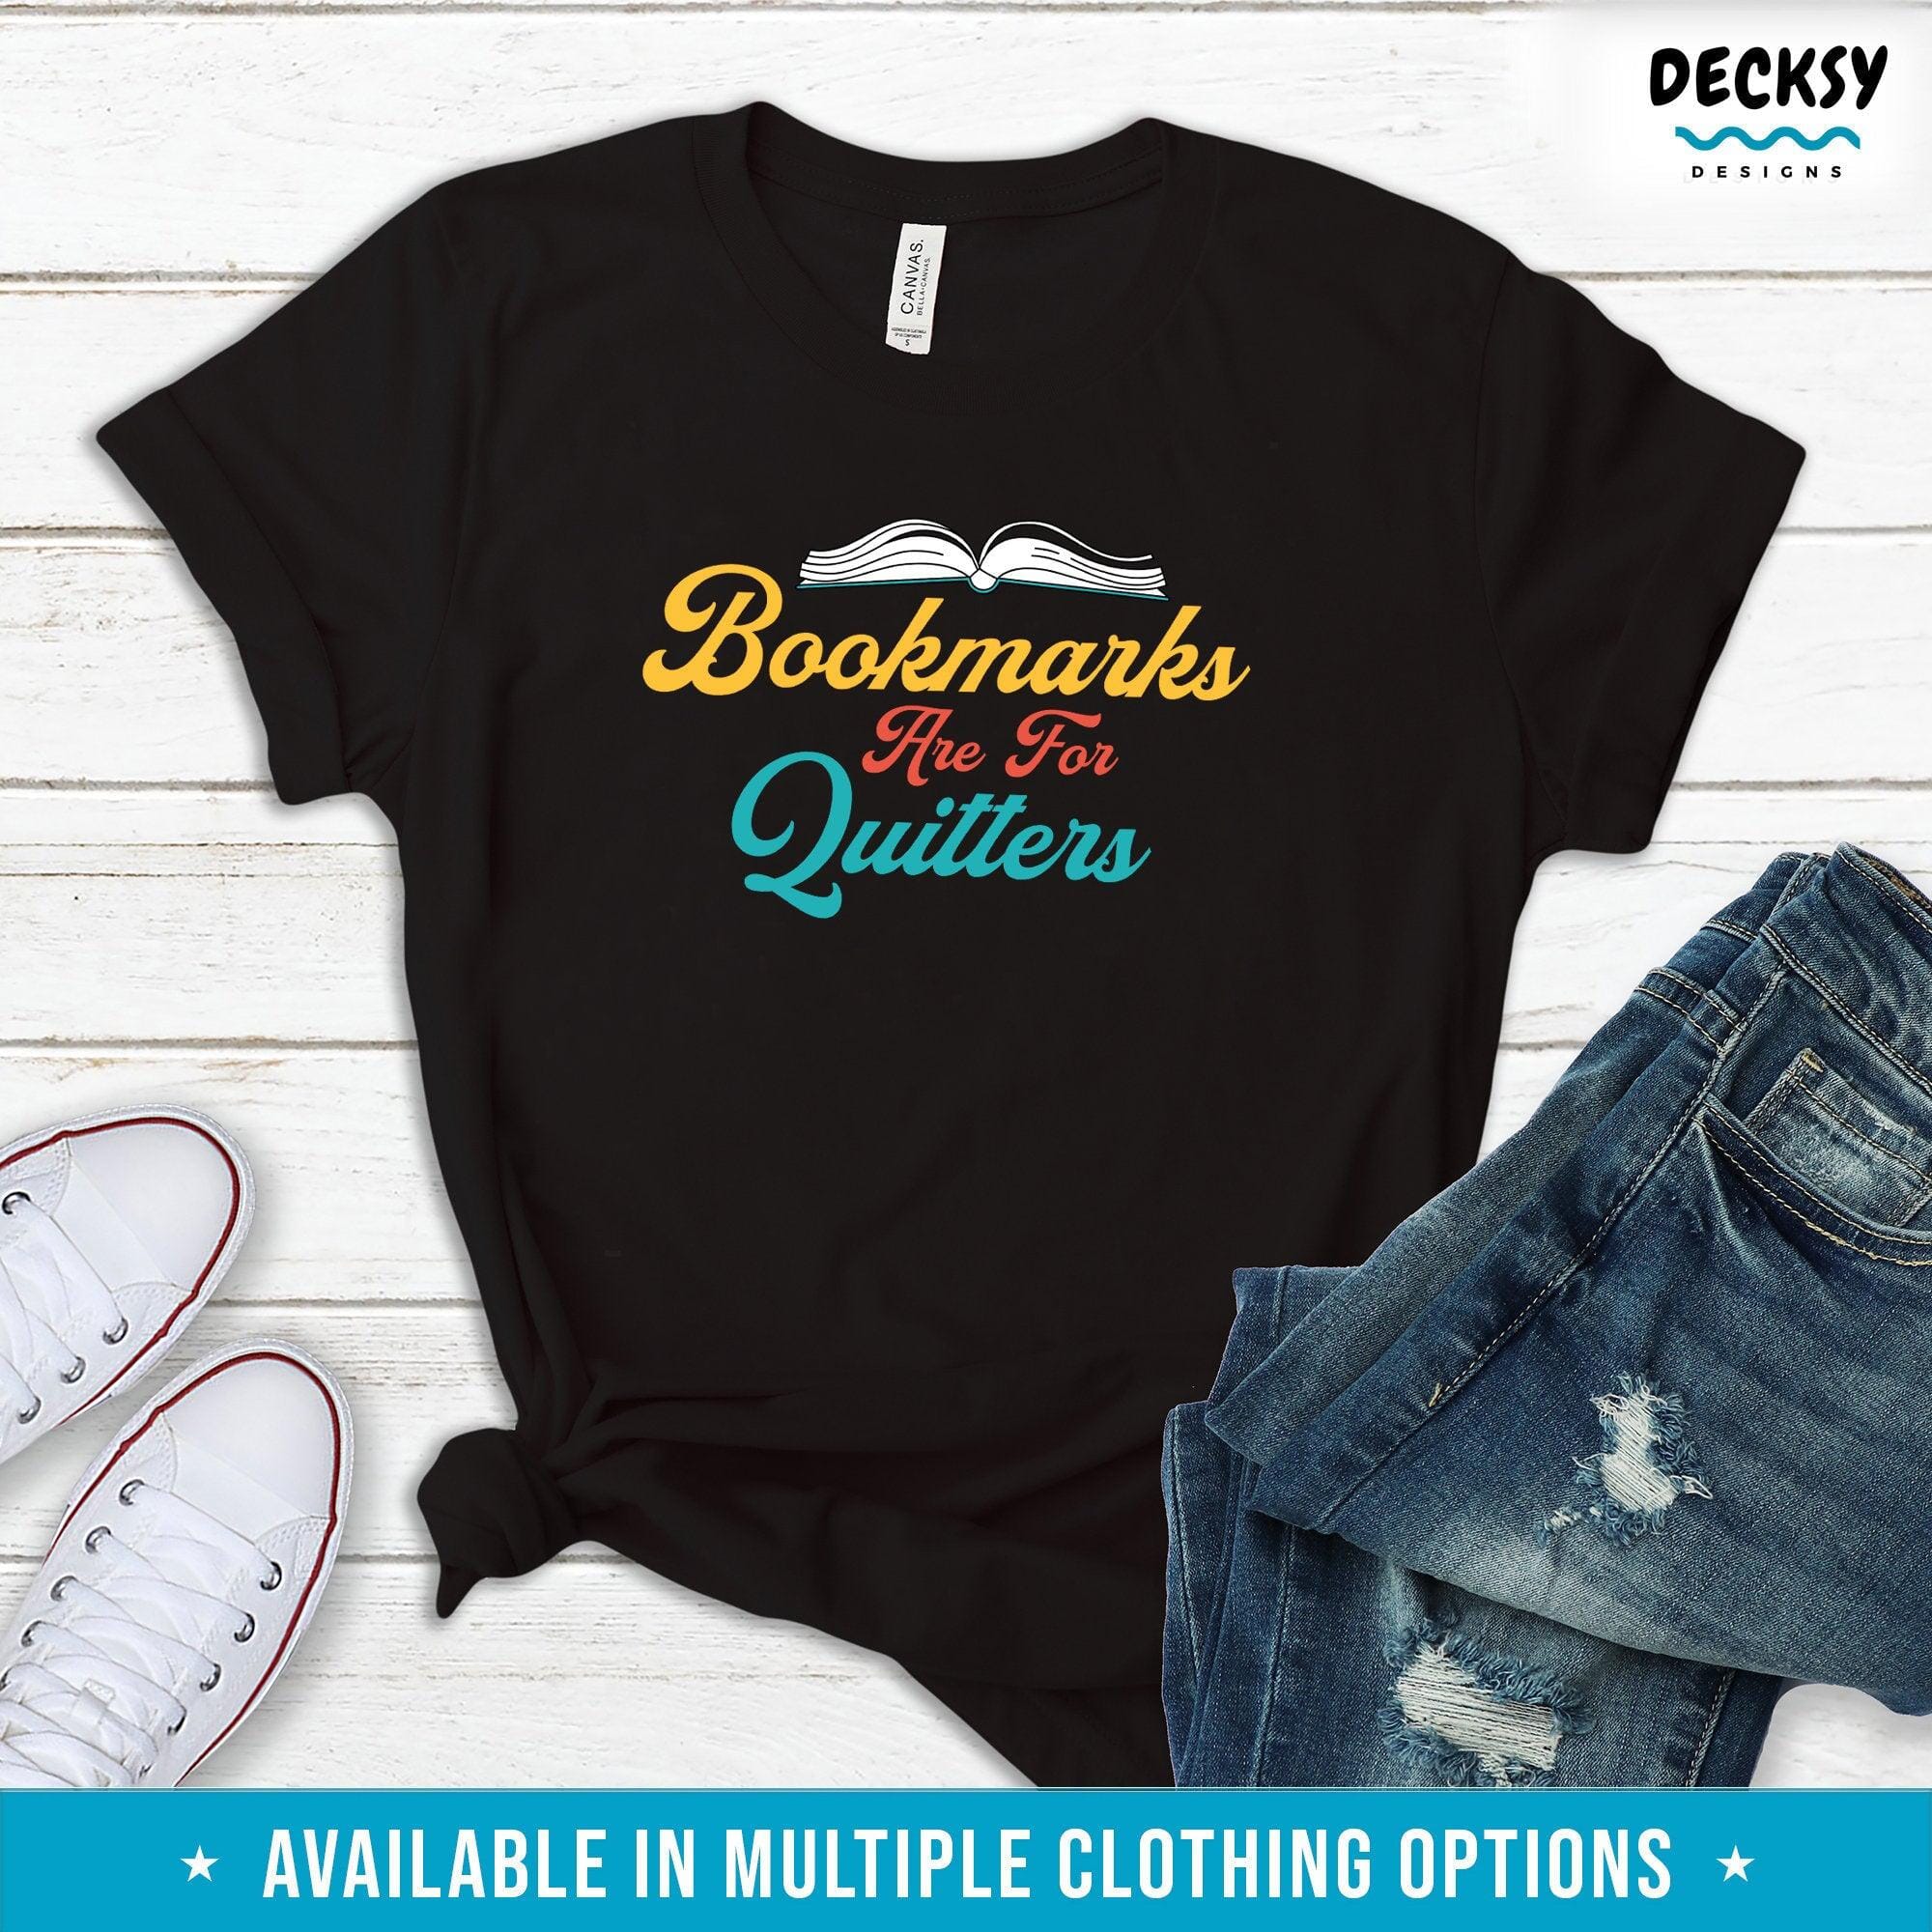 Funny Book Lover Shirt, Reader Gift-Clothing:Gender-Neutral Adult Clothing:Tops & Tees:T-shirts:Graphic Tees-DecksyDesigns